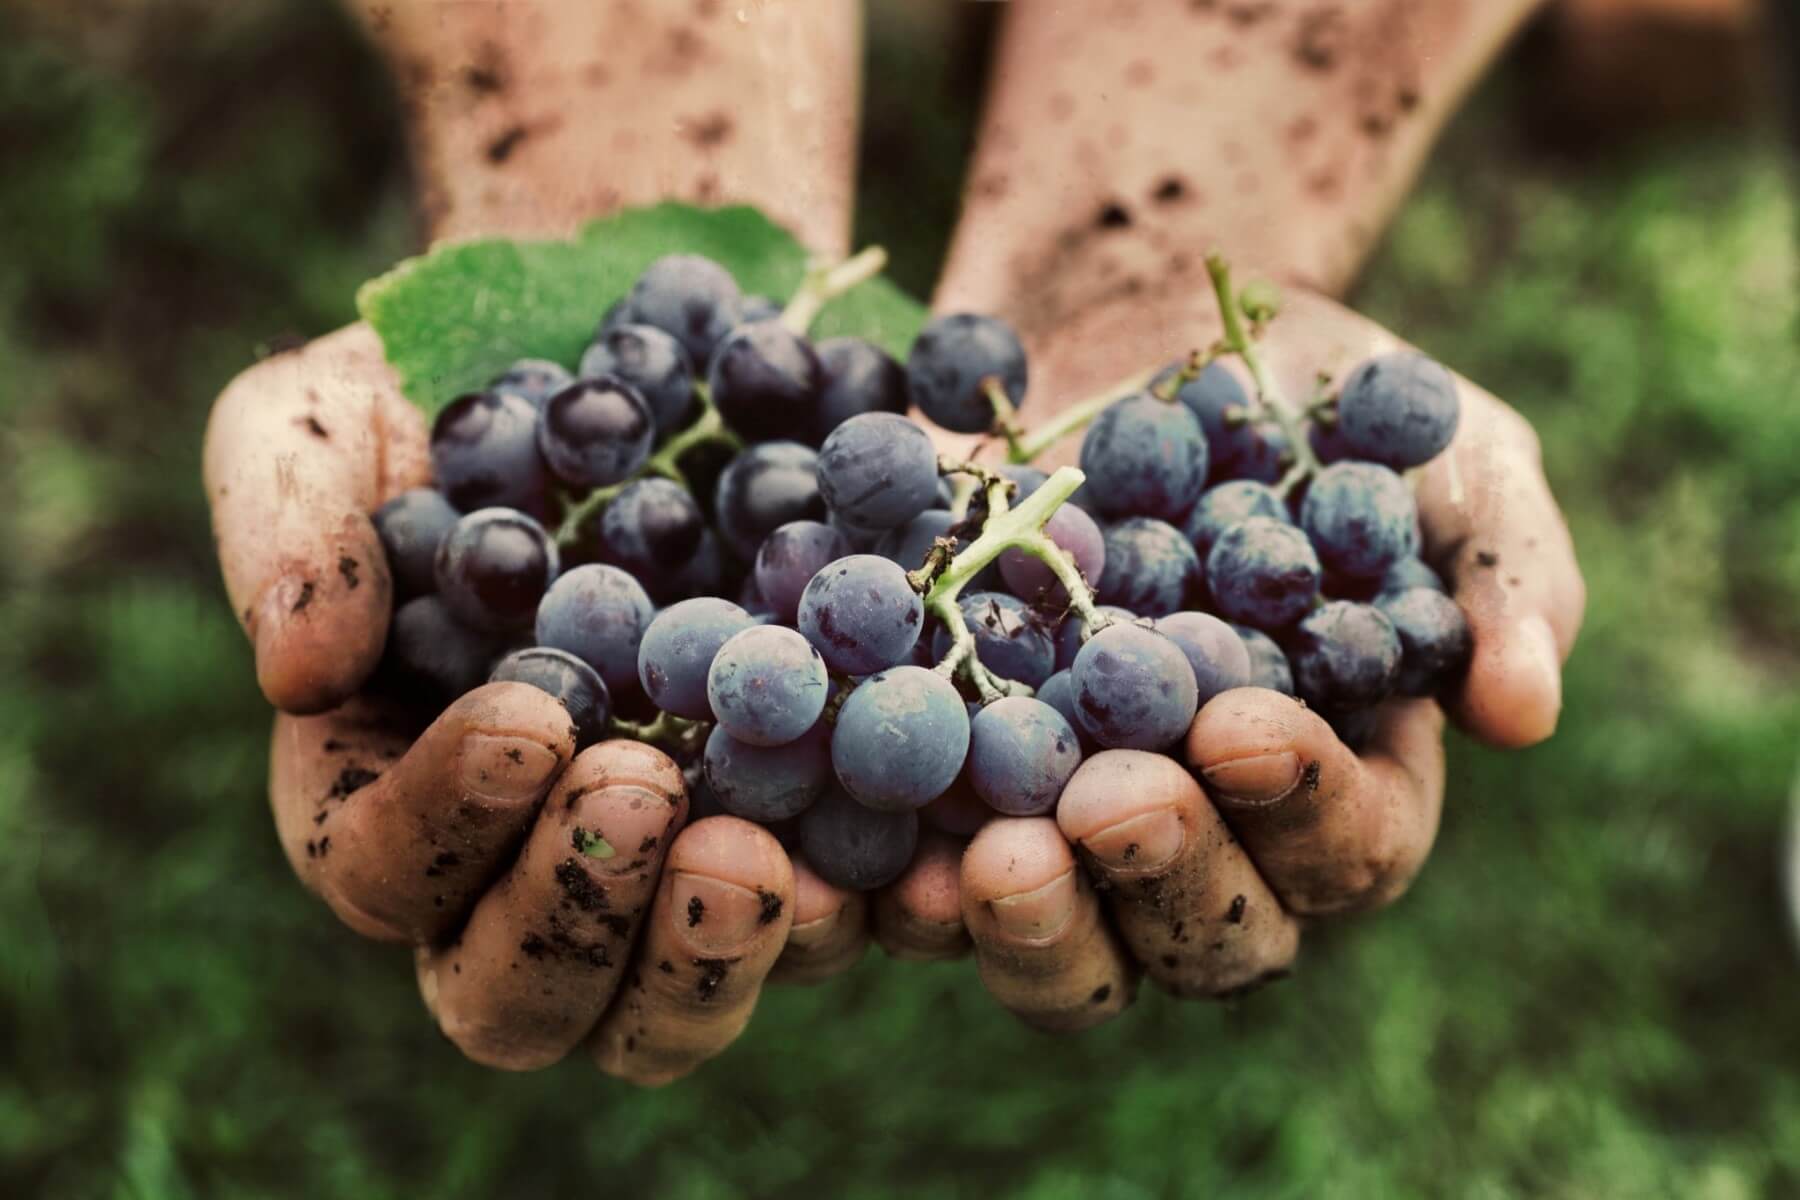 Organic, Vegan and Biodynamic Wines - What You Need to Know